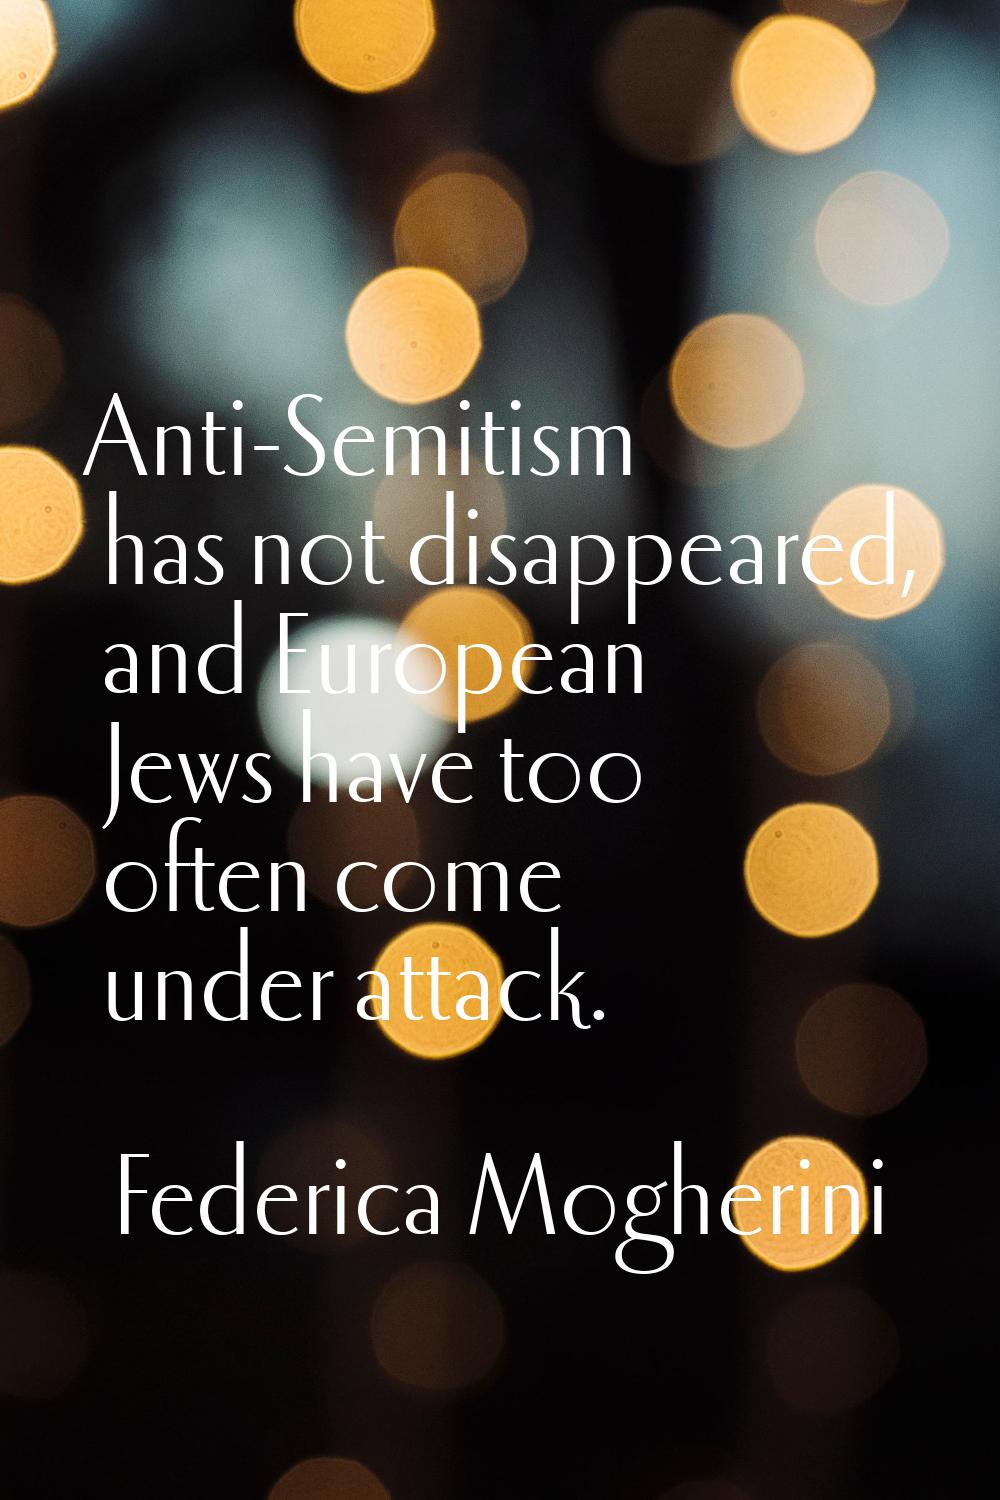 Anti-Semitism has not disappeared, and European Jews have too often come under attack.